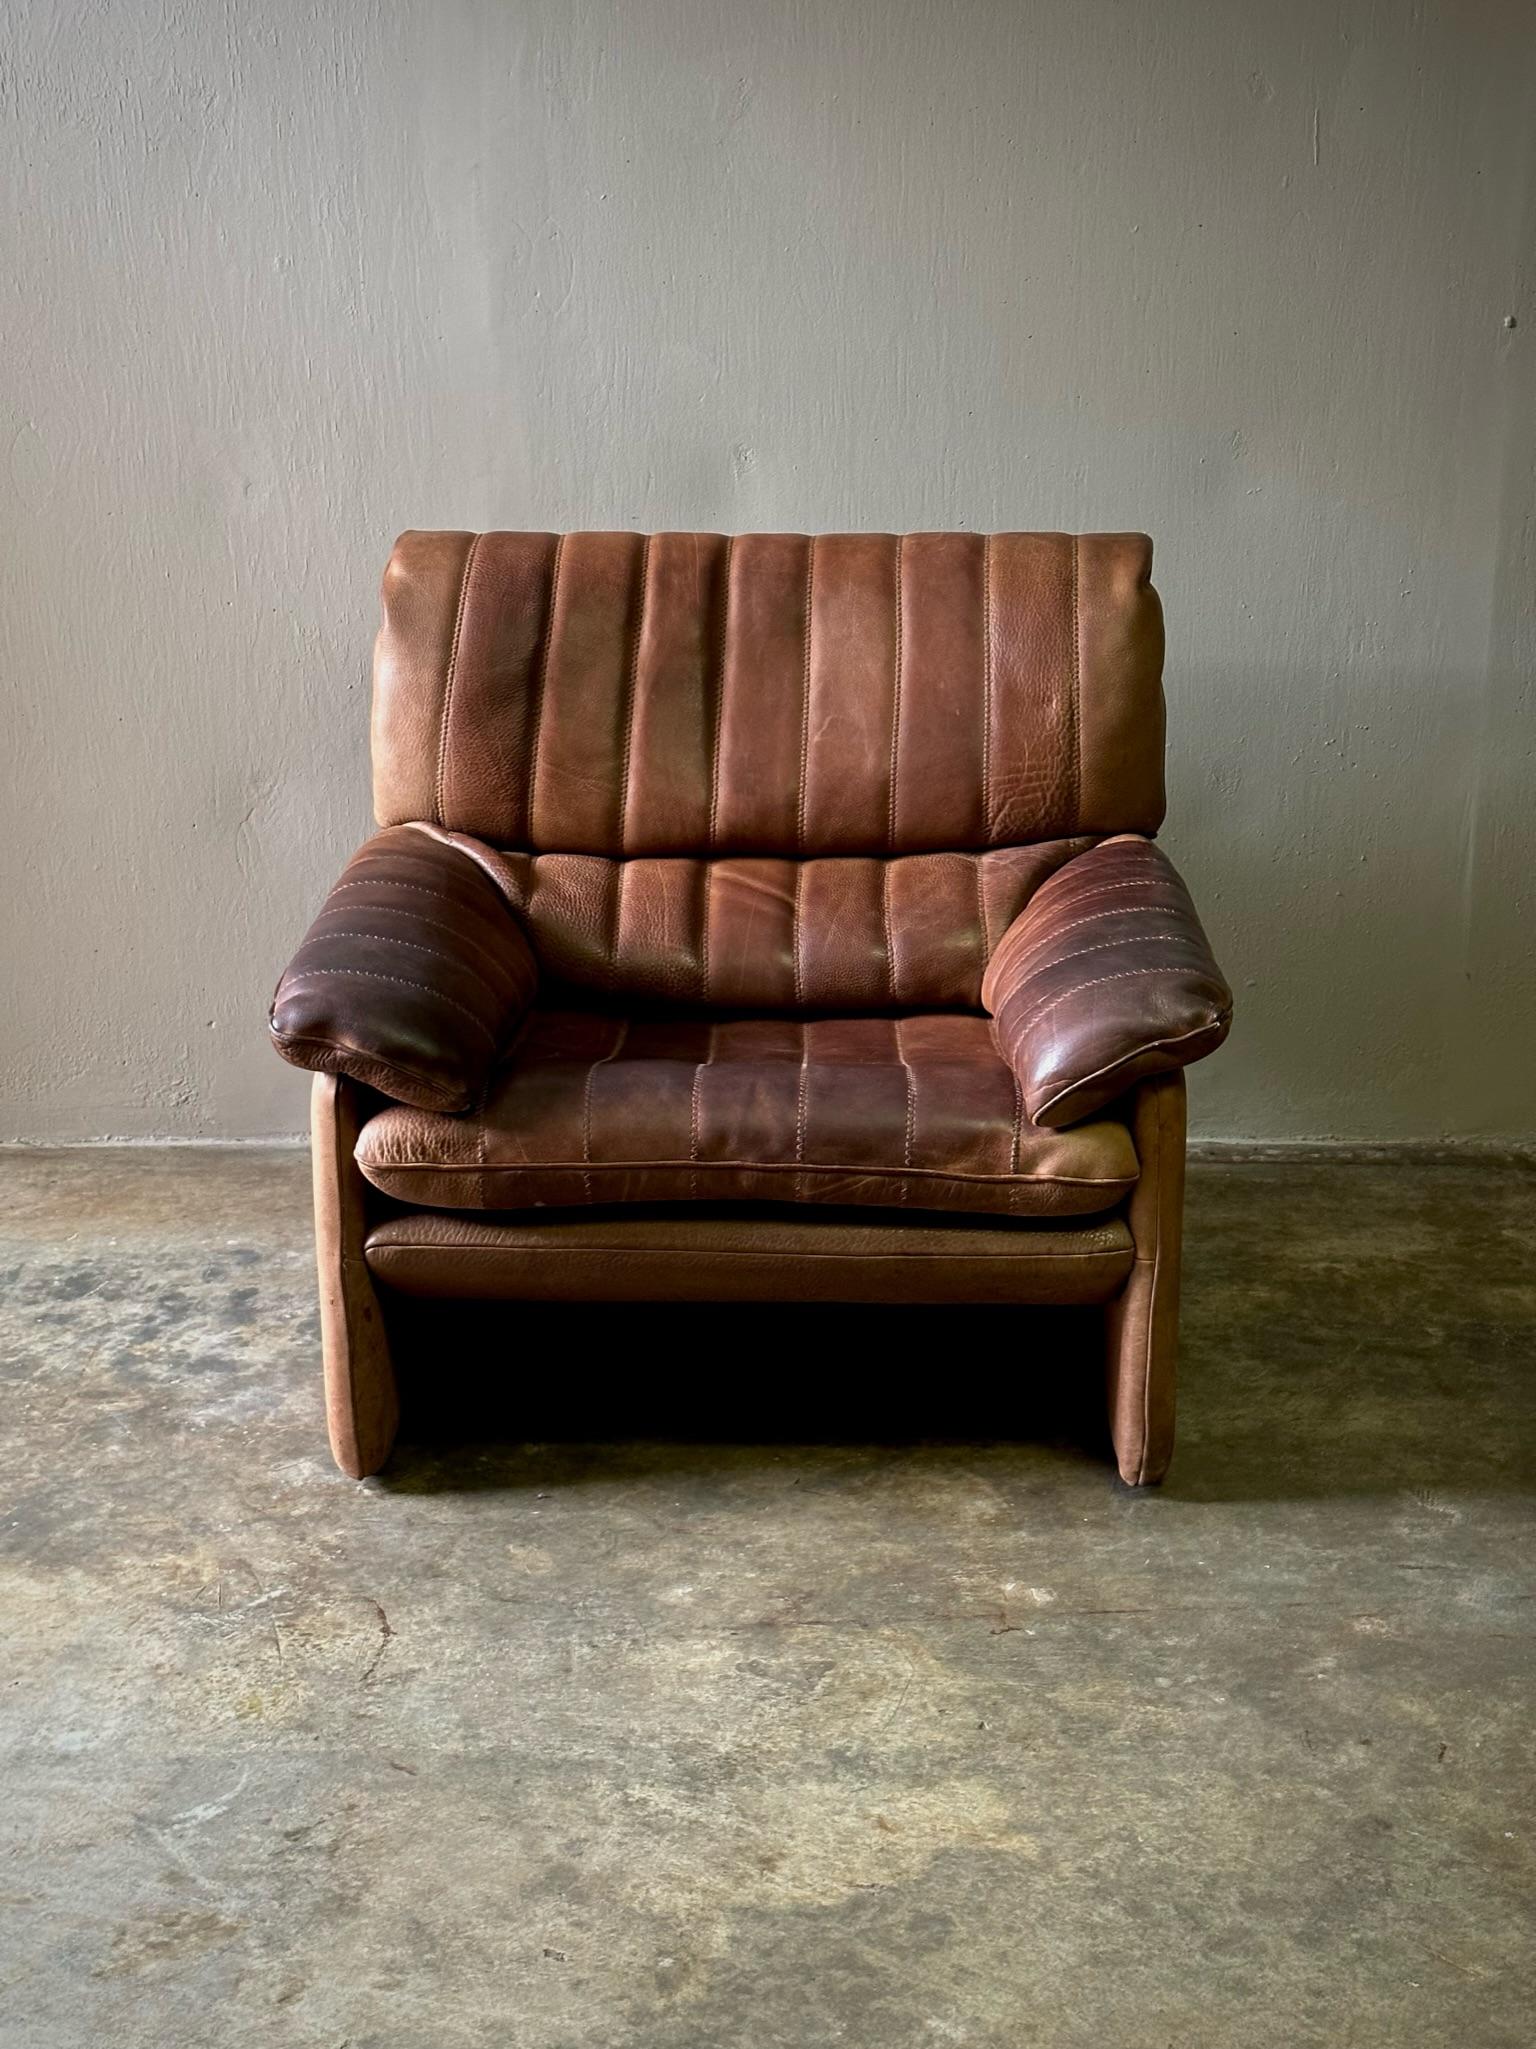 1970s chestnut leather armchair with vertical striation detailing, by iconic Swiss leather manufacturer De Sede. Comfortable and capacious with a sleek midcentury silhouette. 

Switzerland, circa 1970

Dimensions: 35.4W x 35.4D x 30H